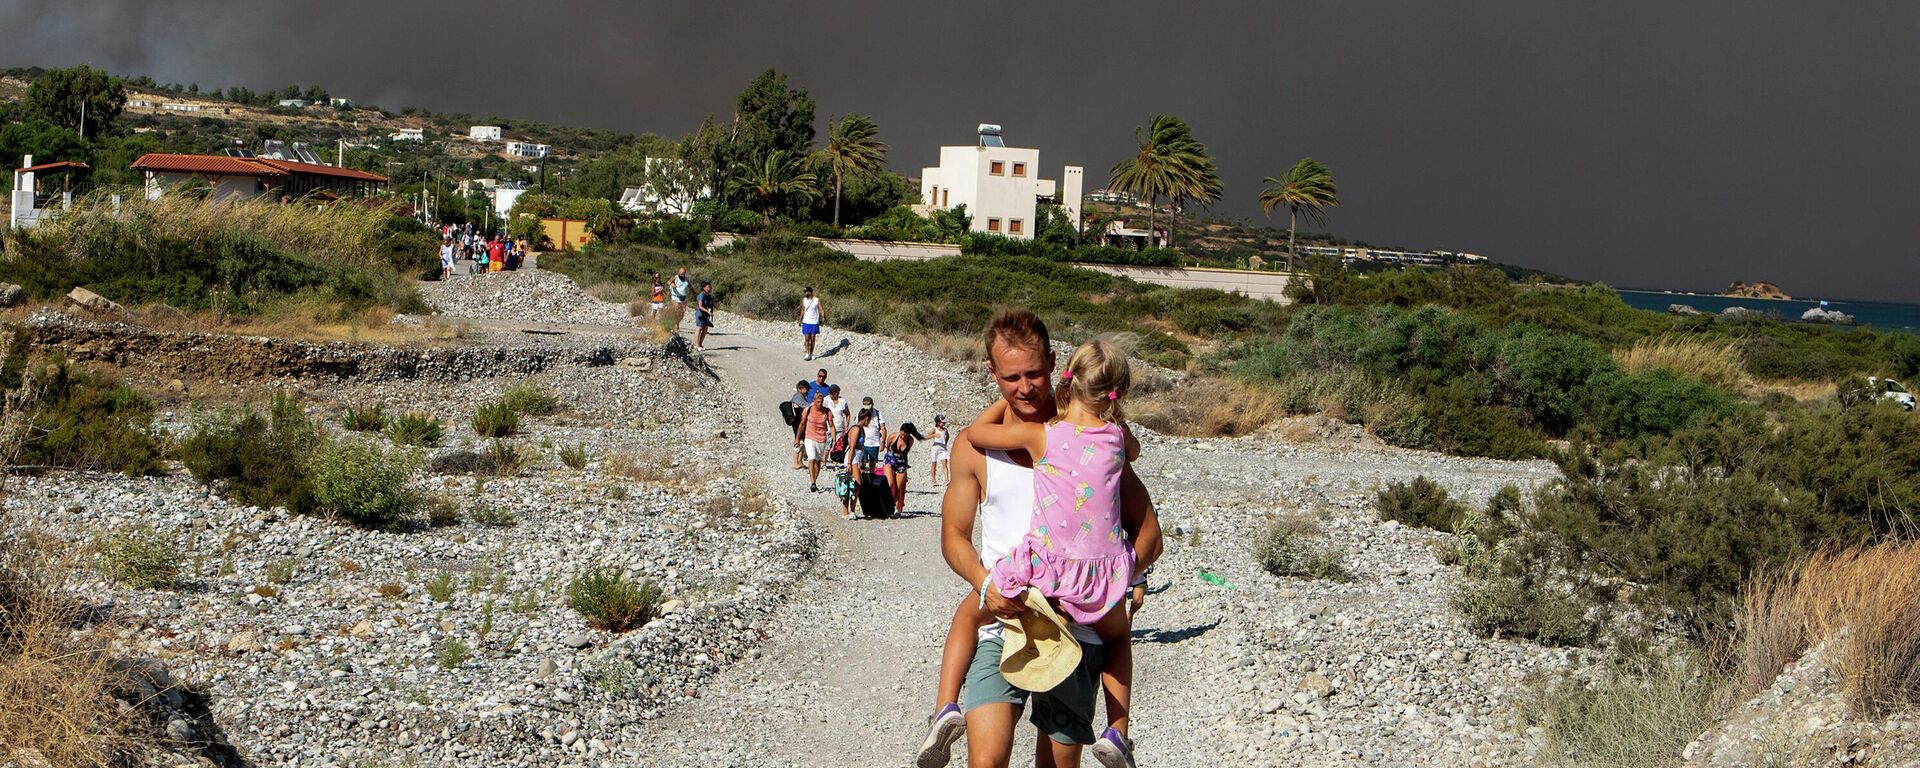 A man carries a child as they leave an area where a forest fire burns, on the island of Rhodes, Greece, Saturday, July 22, 2023.  - Sputnik International, 1920, 26.07.2023